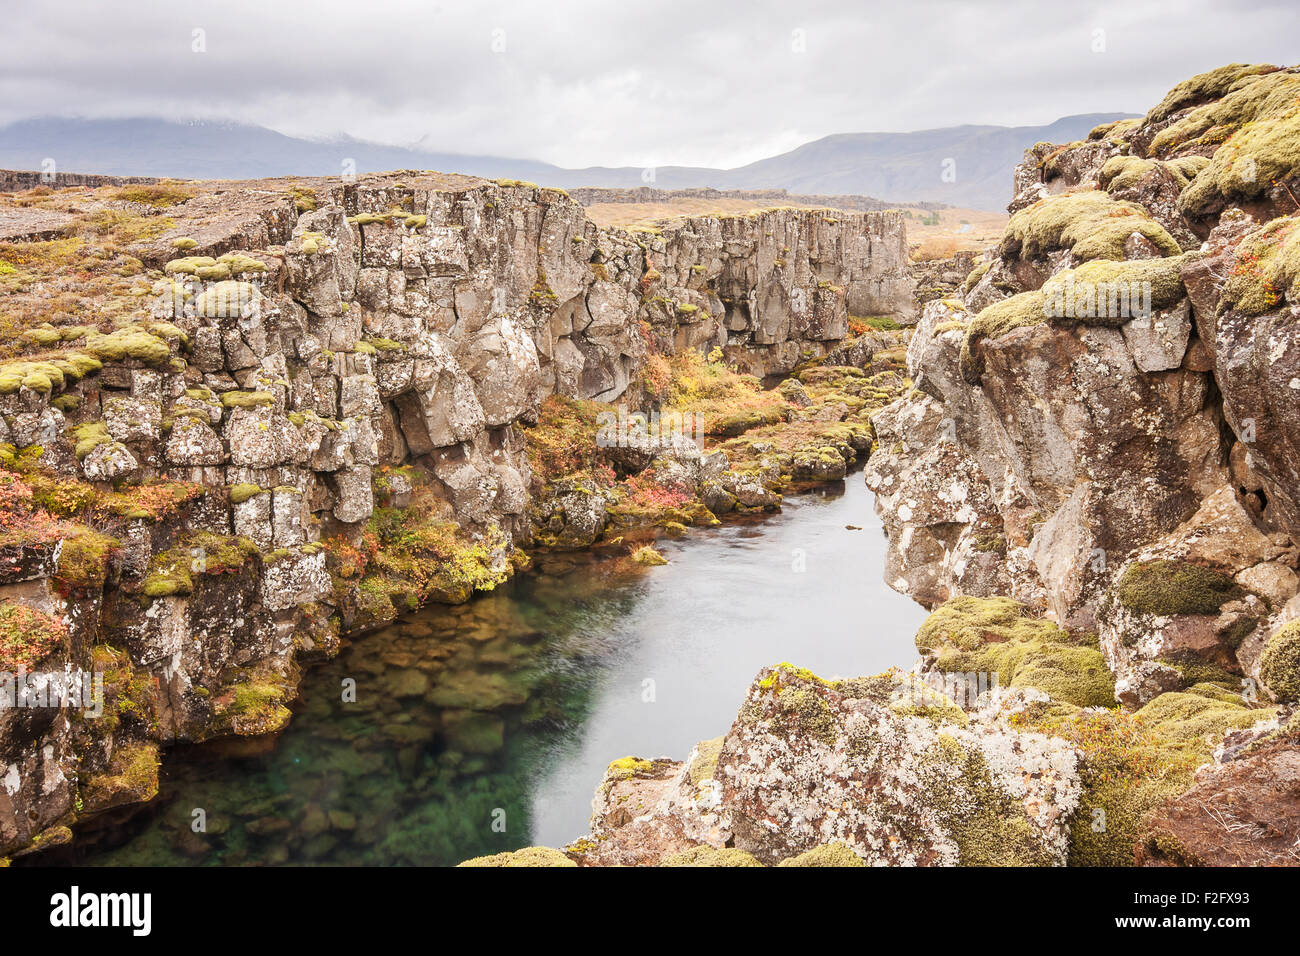 A Fissure in Thingvellir national park in Iceland, shot in autumn with full fall colors evident. Overcast sky Stock Photo